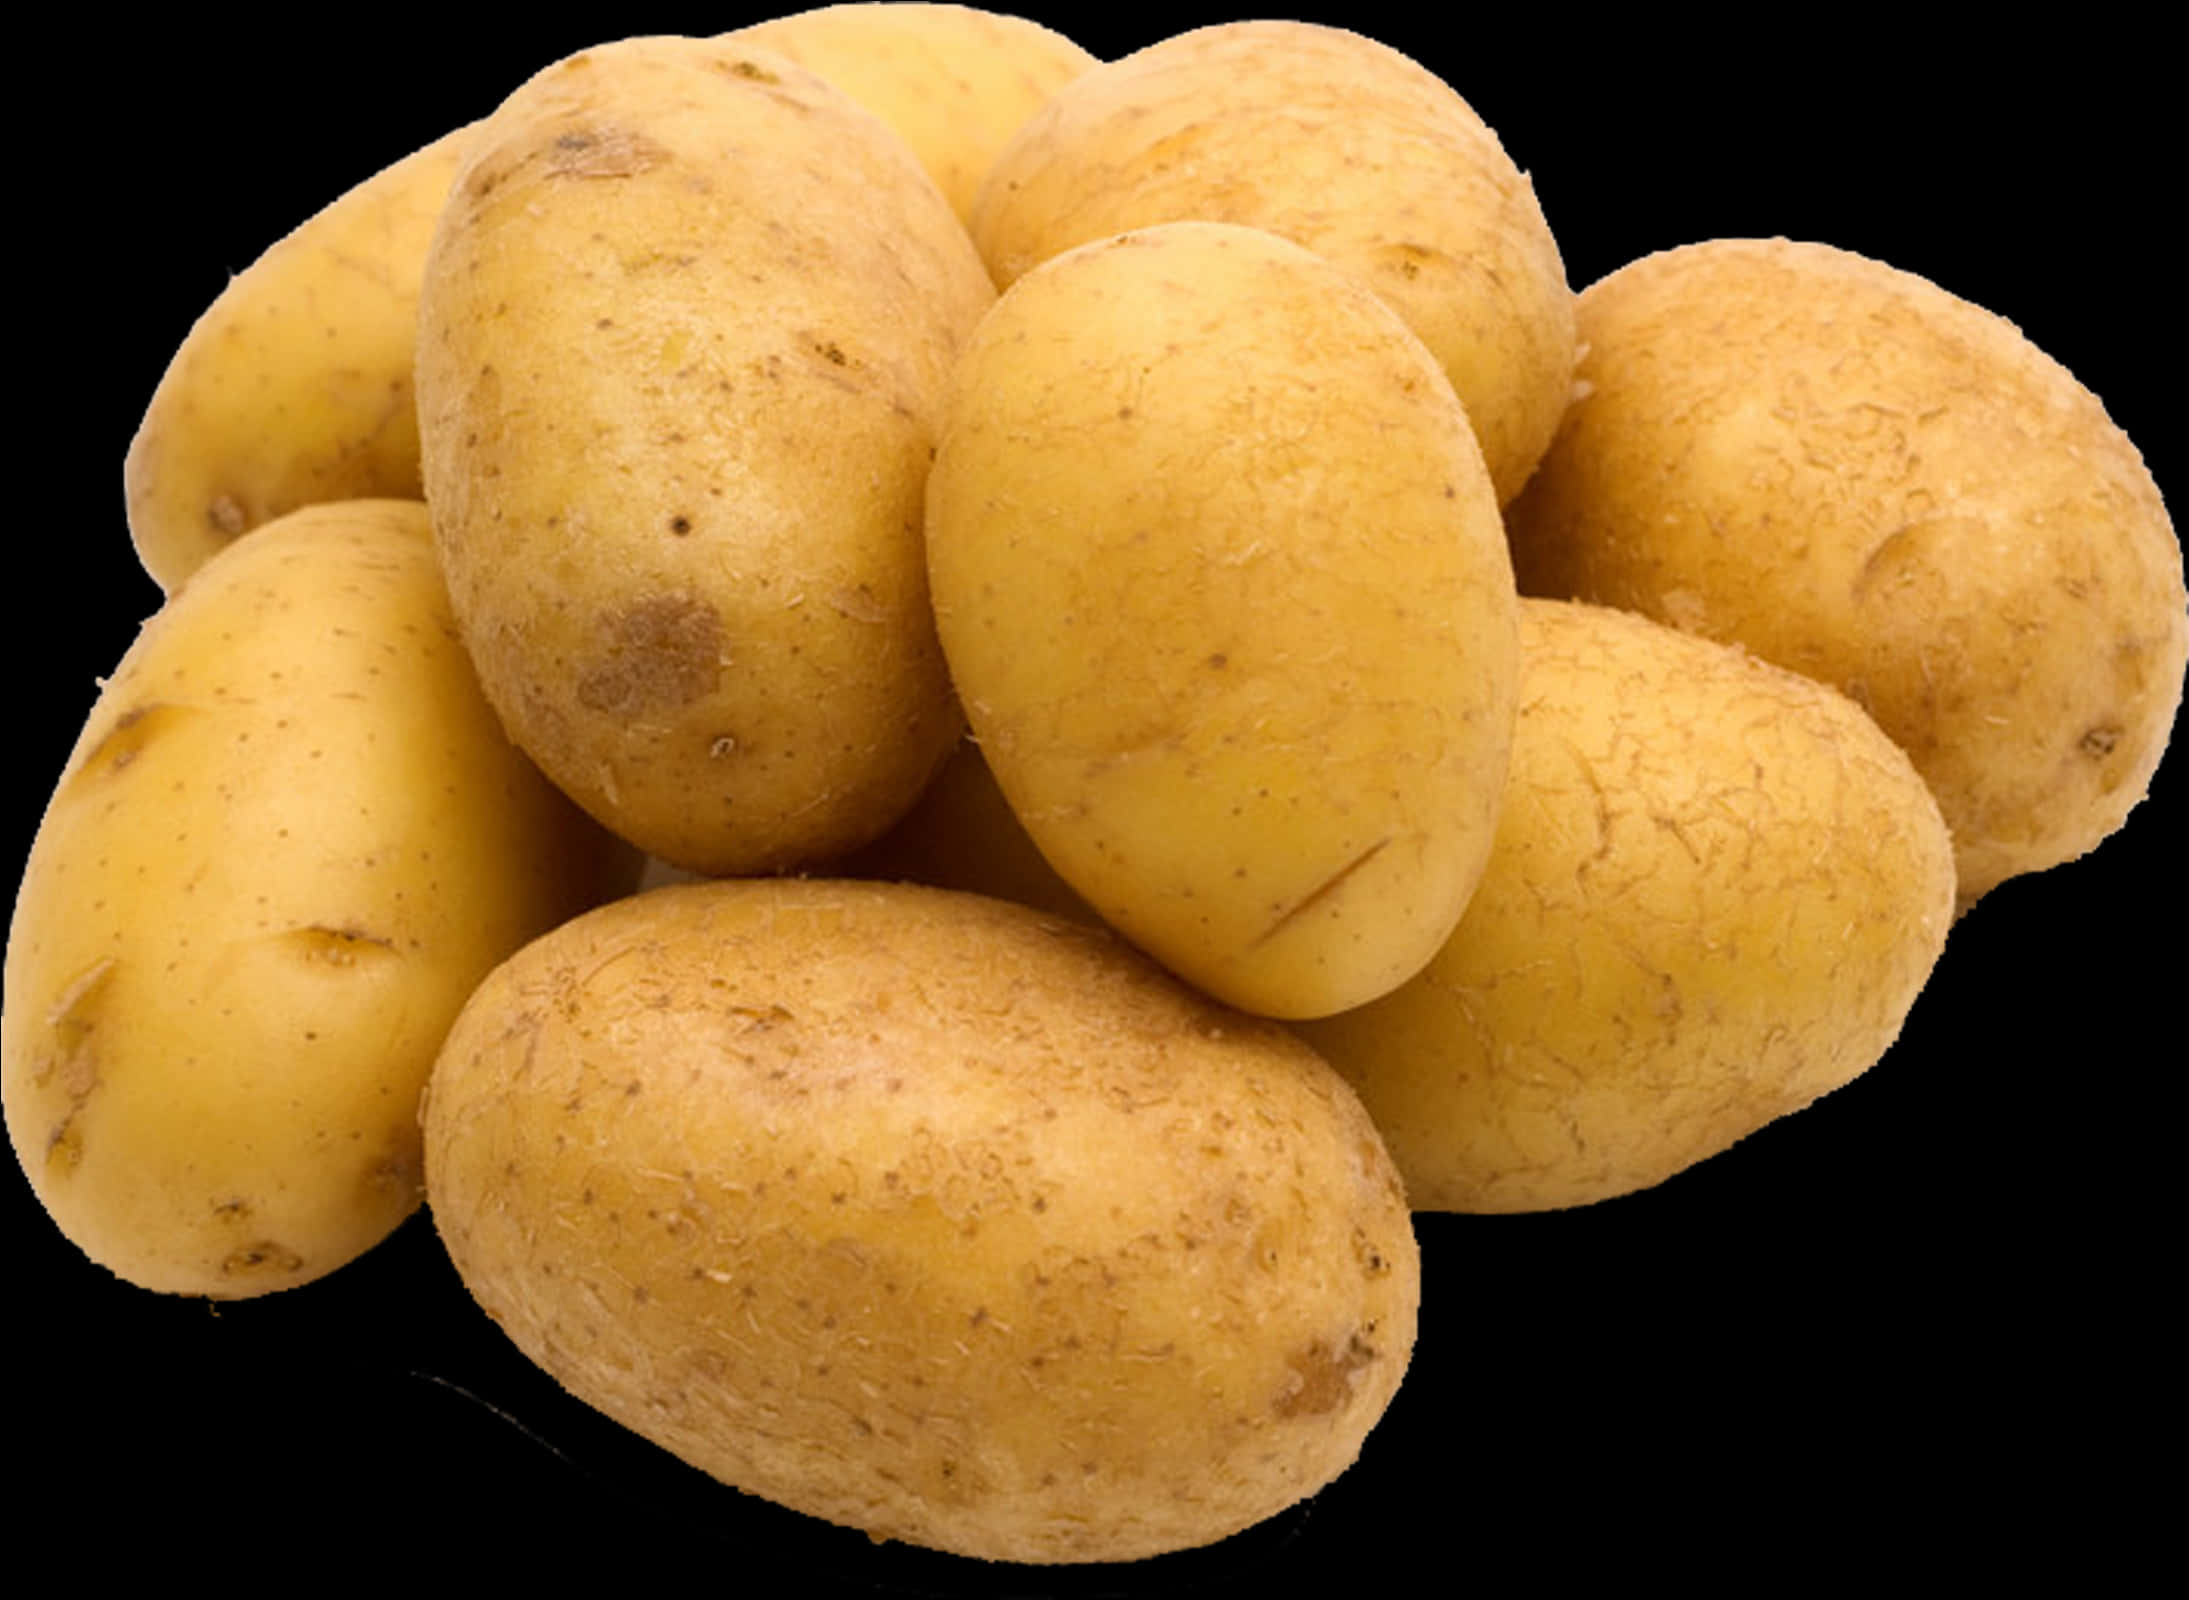 A Pile Of Potatoes On A Black Background